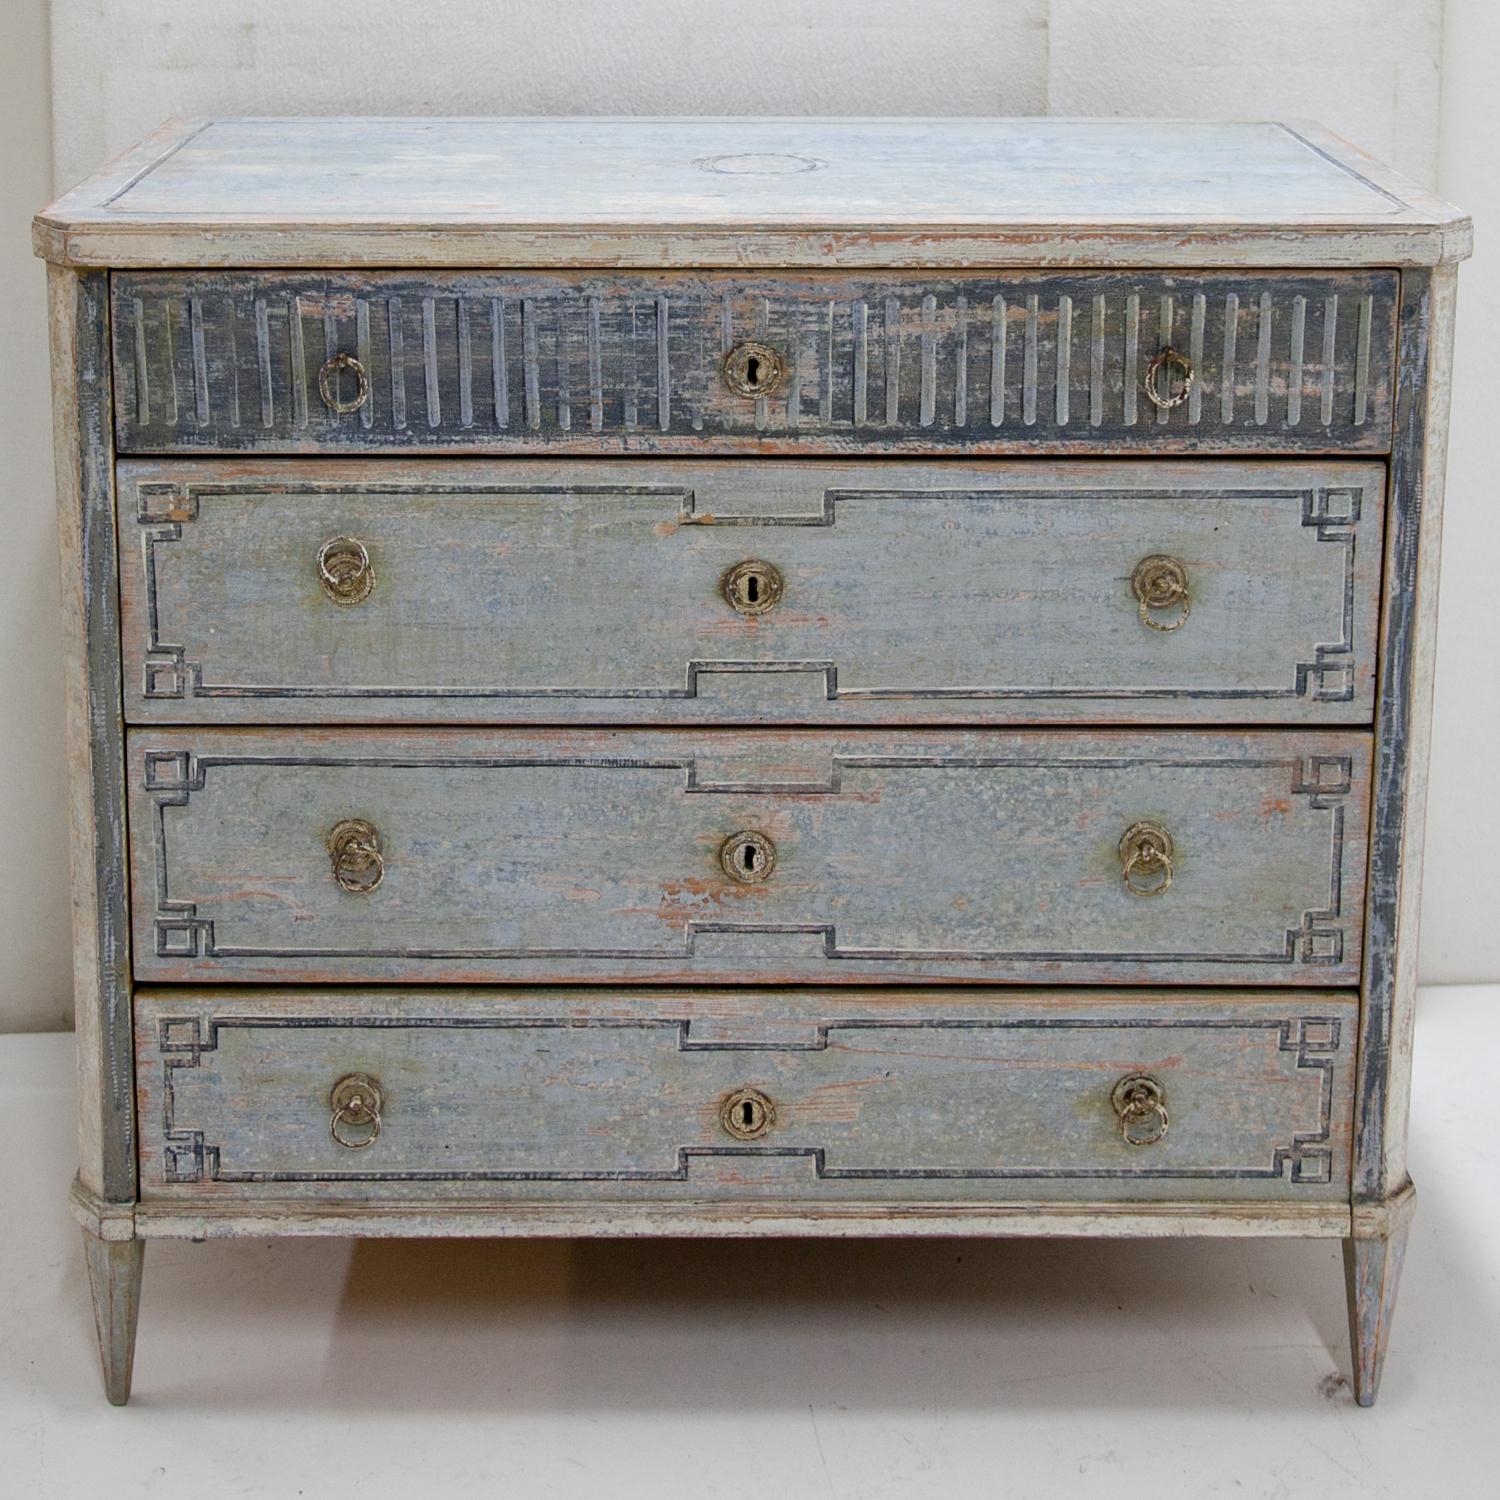 Four-drawered painted chests of drawers with slanted corners, standing on tapered feet. The new blue Gustavian-style paint was done after historical designs and has a distressed patina. Monogrammed P. M. and dated 1878 on the backside.